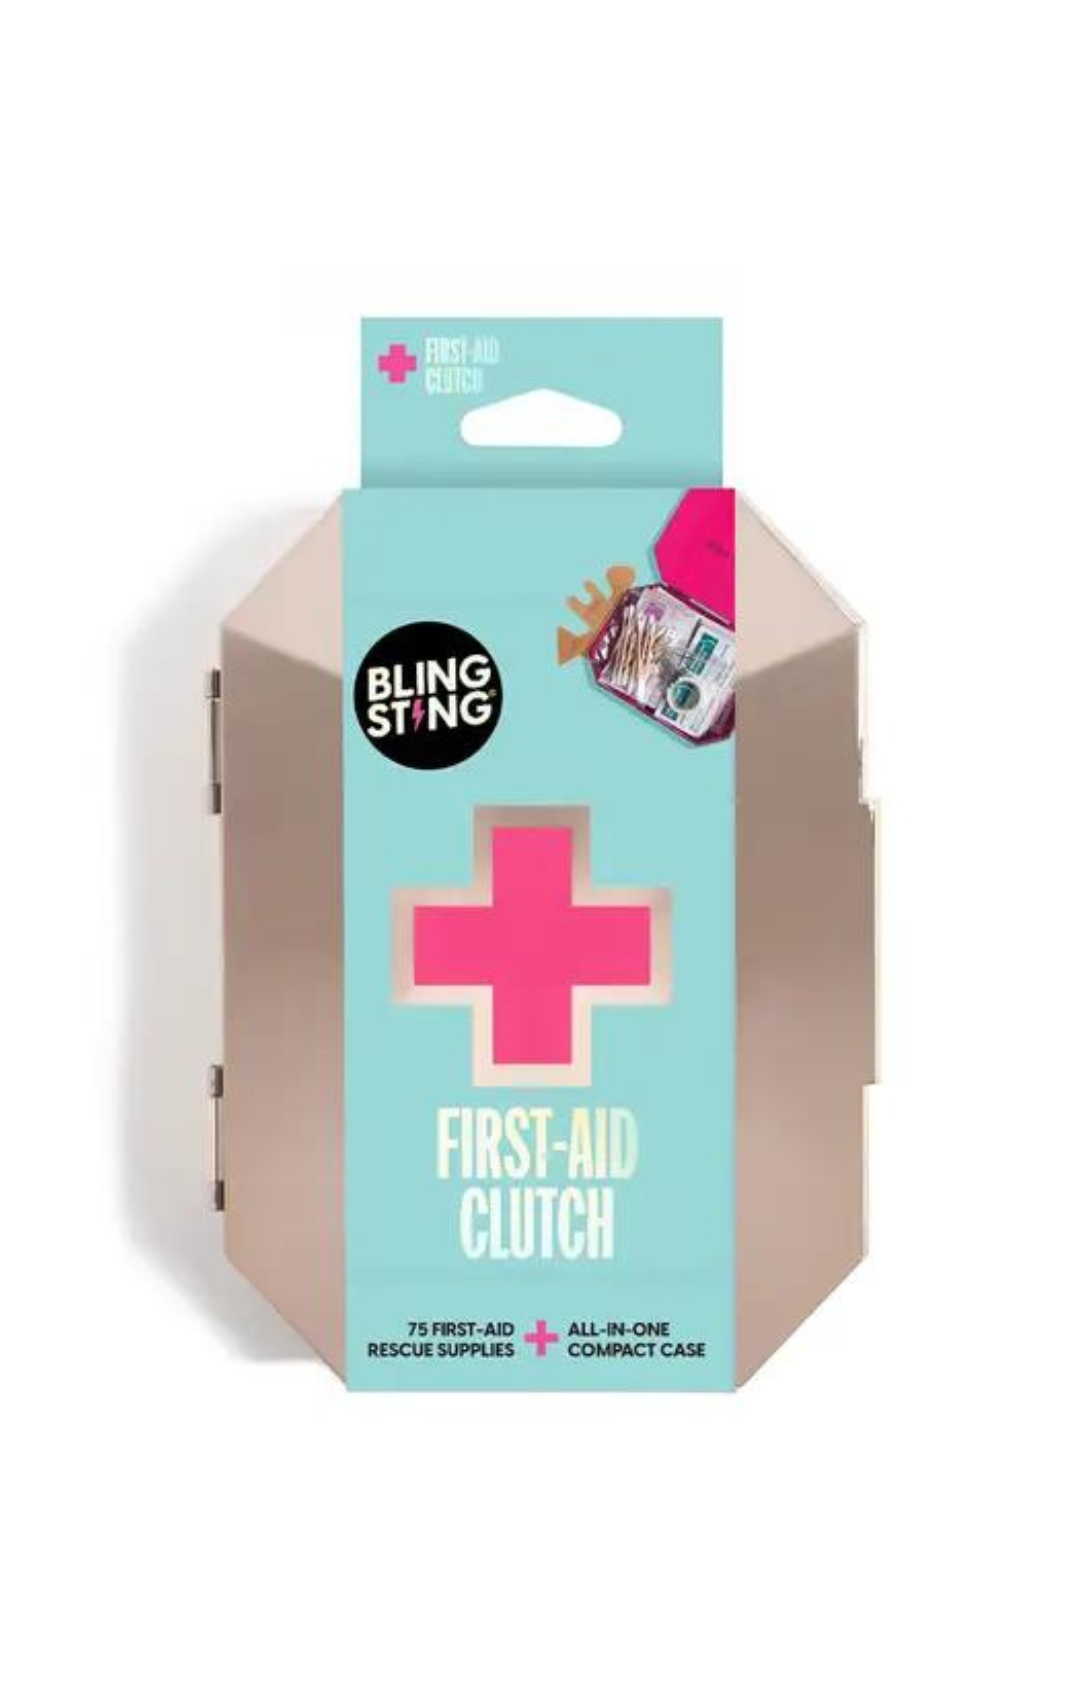 Bling Sting First Aid Kit